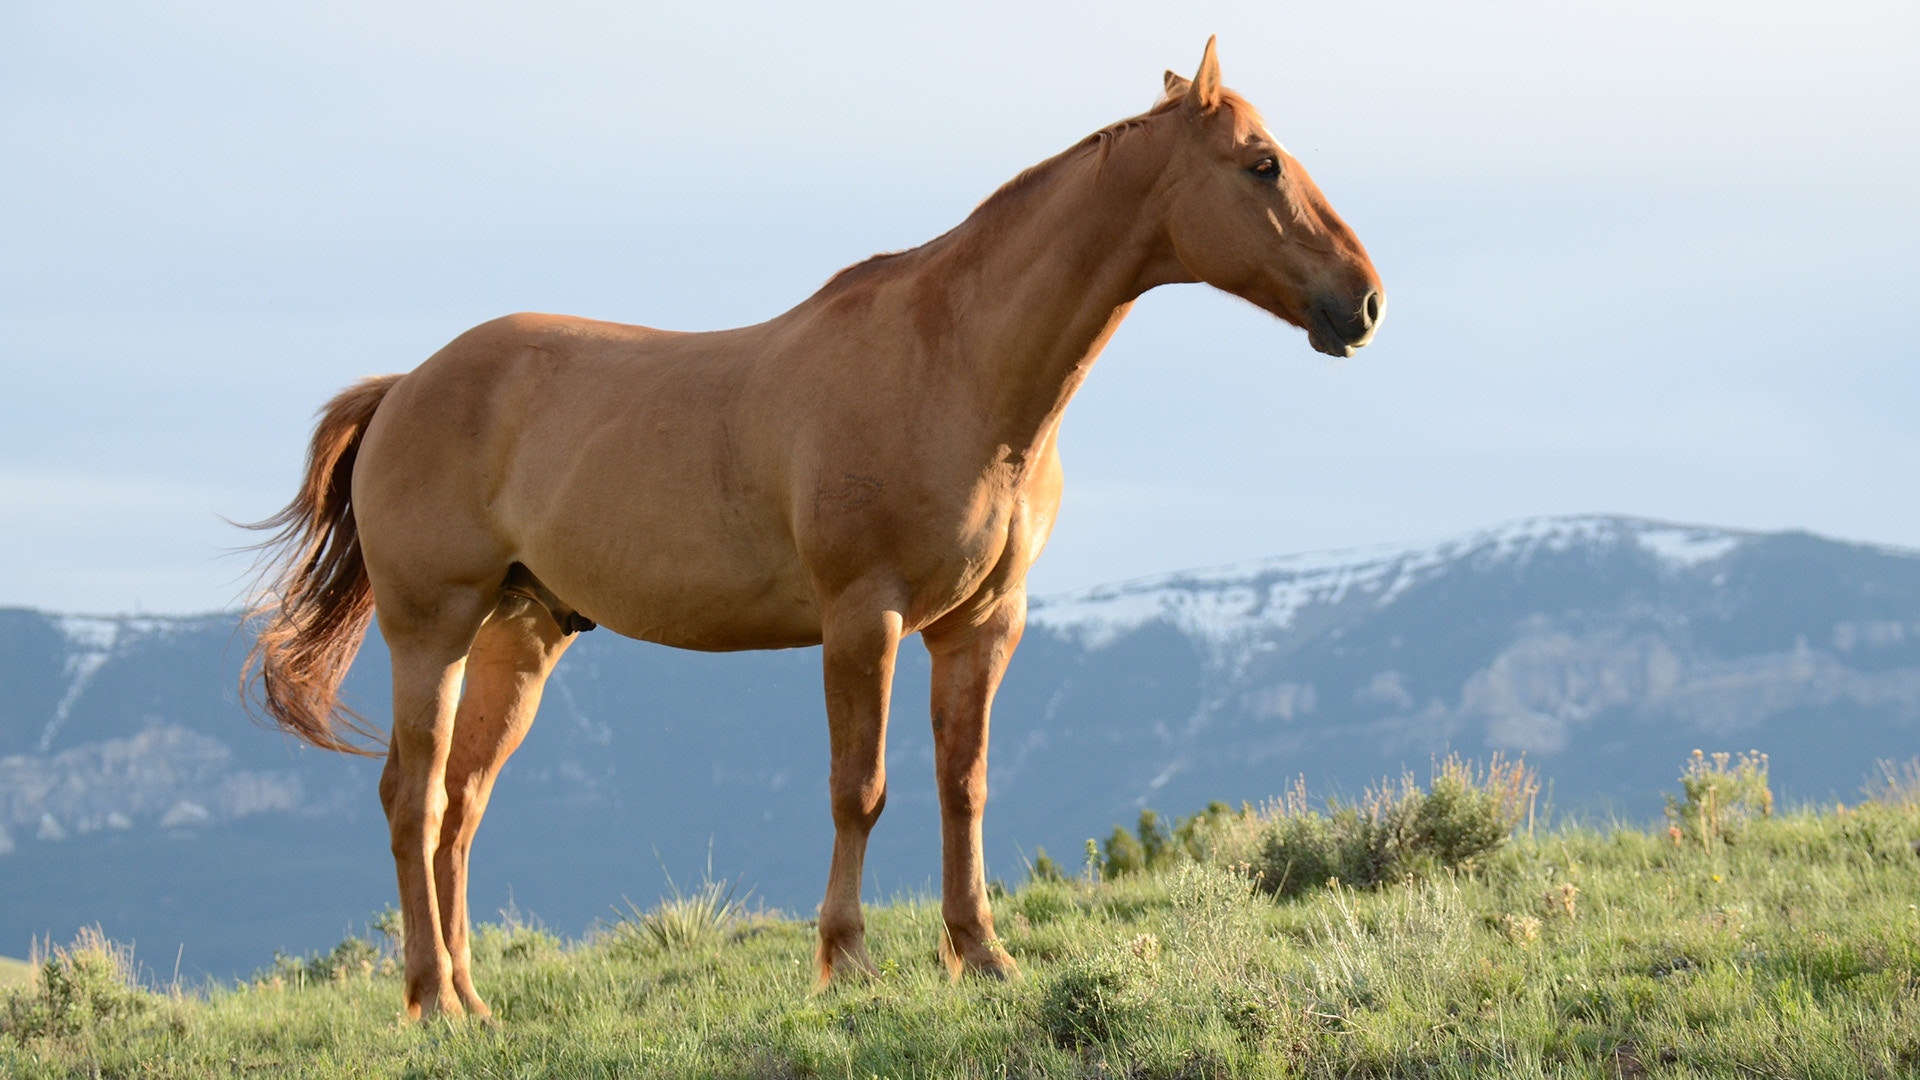 Going Saddle-Free: How to Mount a Horse Without a Saddle?